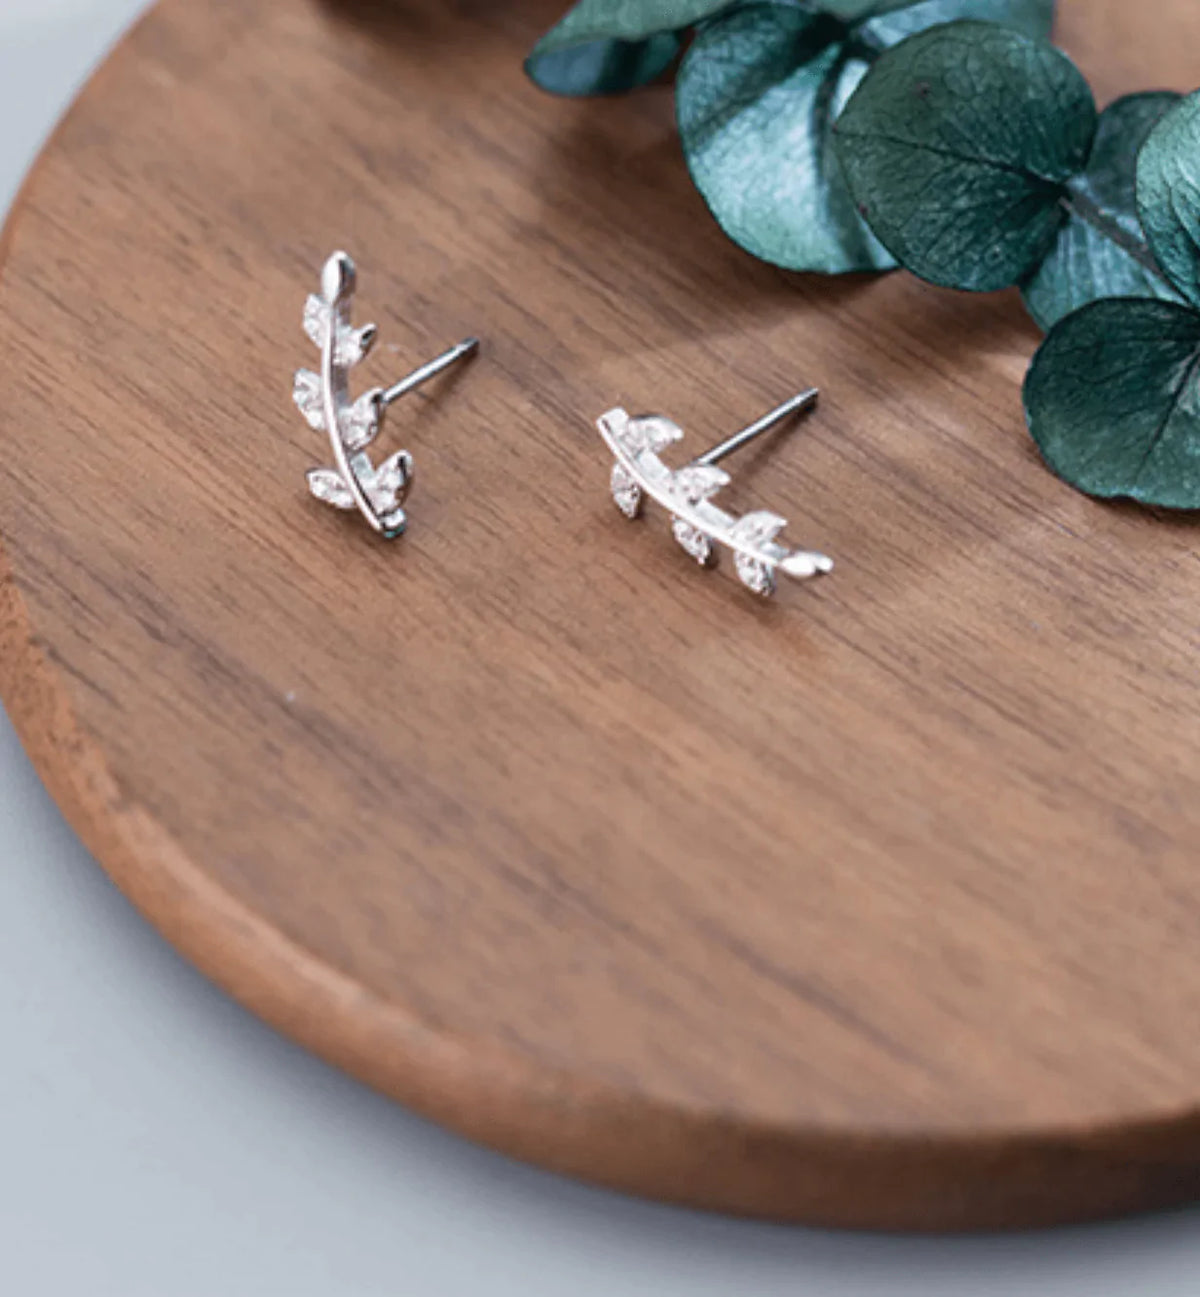 Dazzling Leaf Stud Earrings With Cubic Zirconia Stones